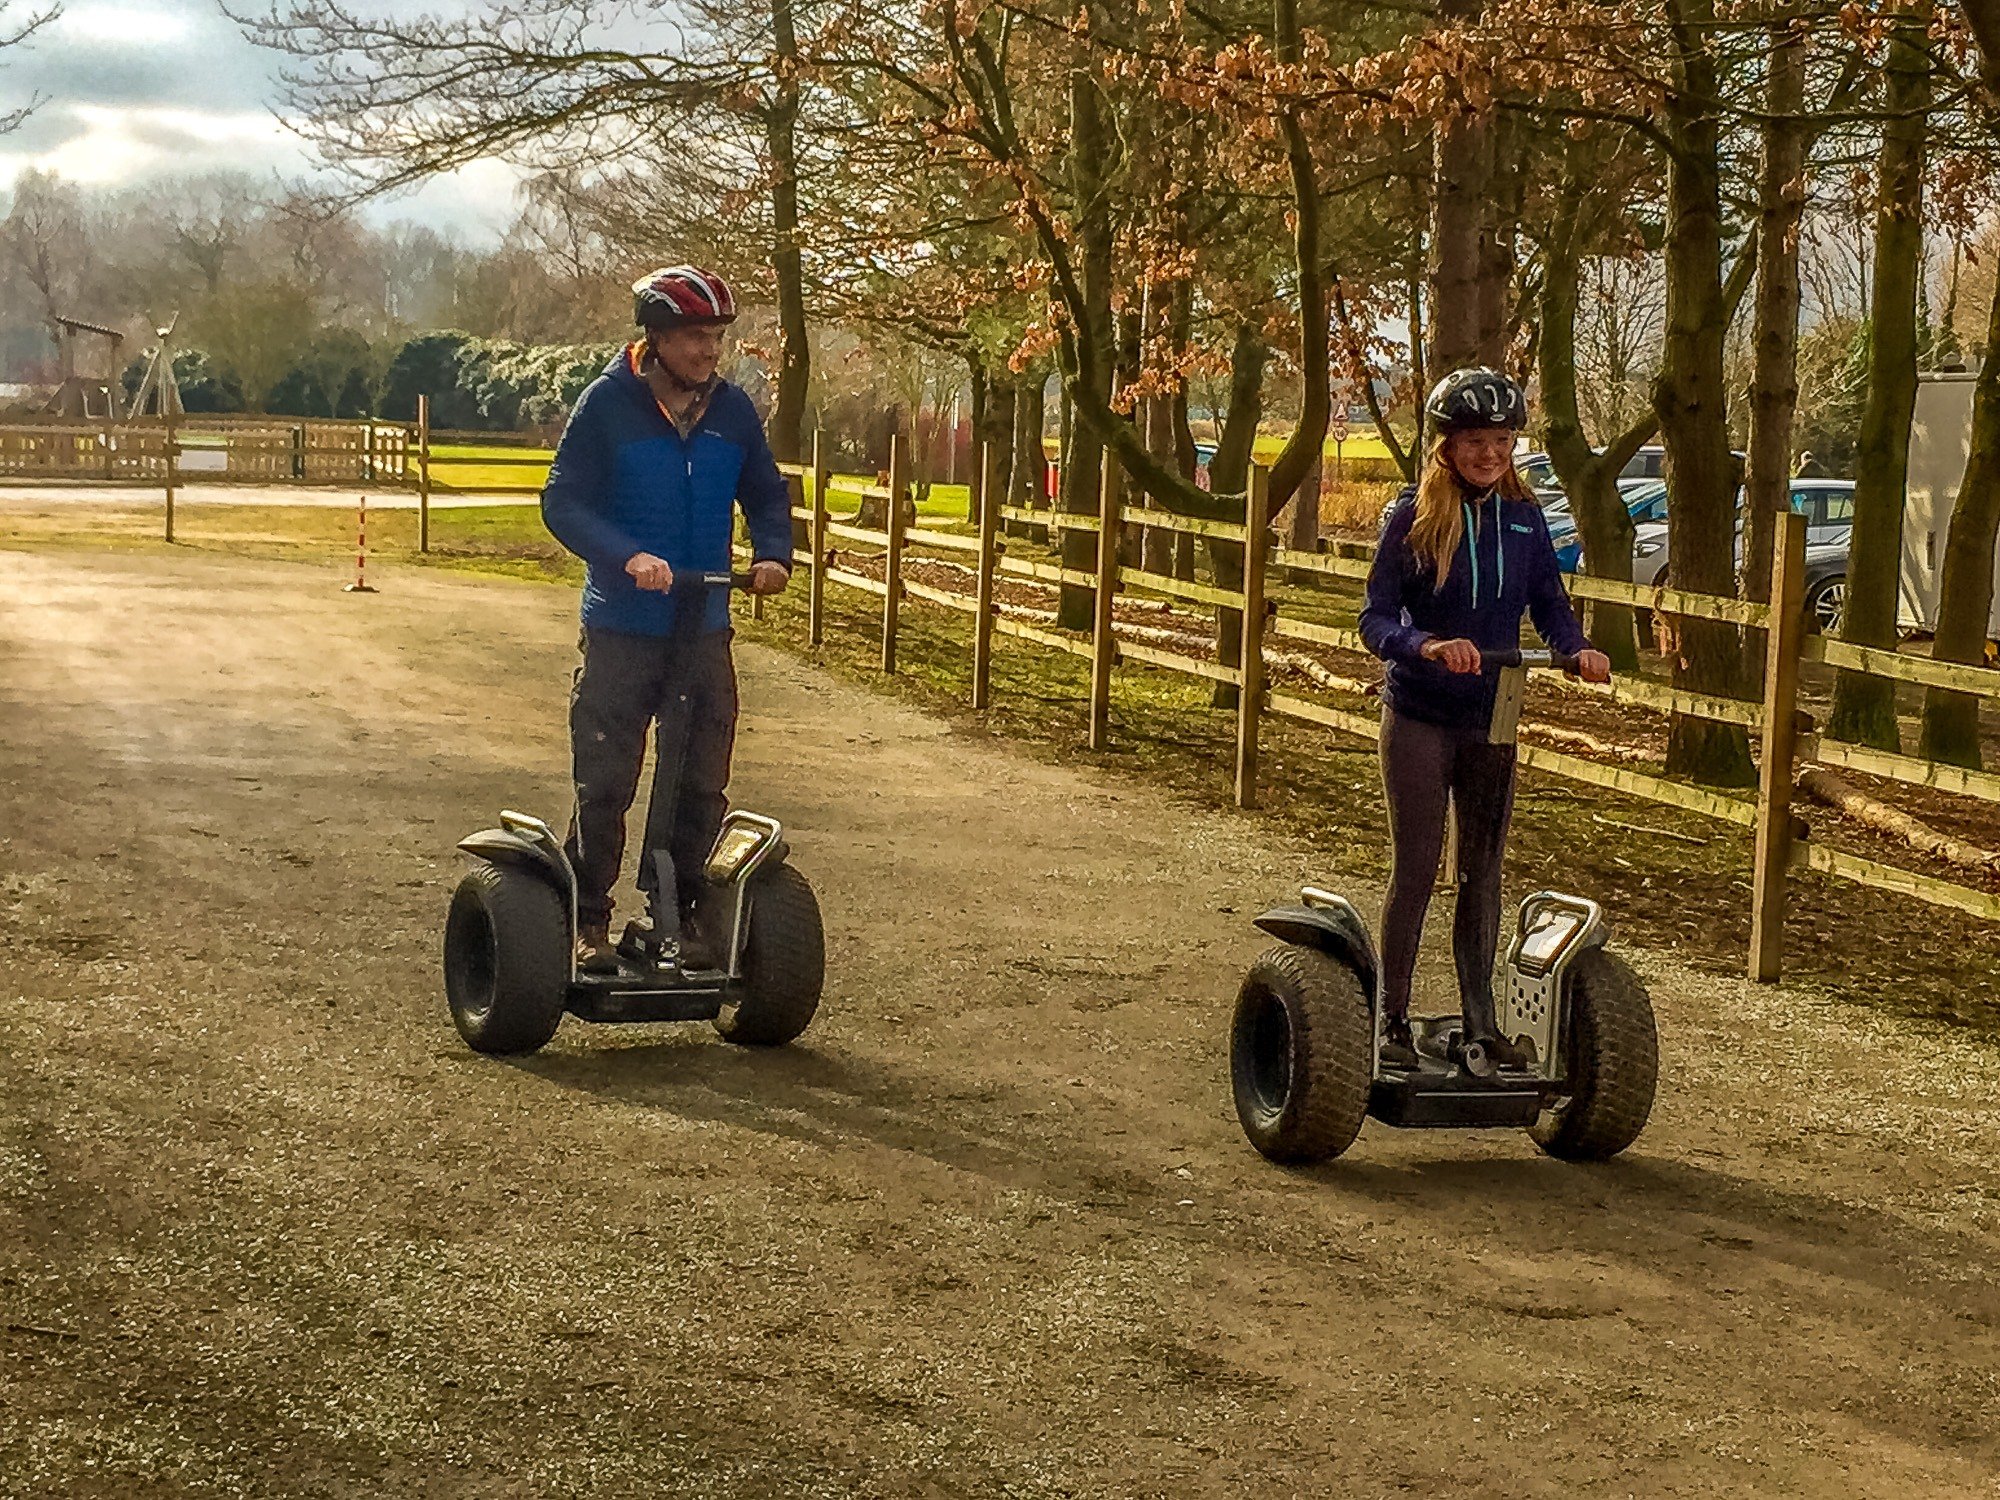  Trying the Segways at the Outdoor Adventure Zone. Note that riders must be at least 7 stone.